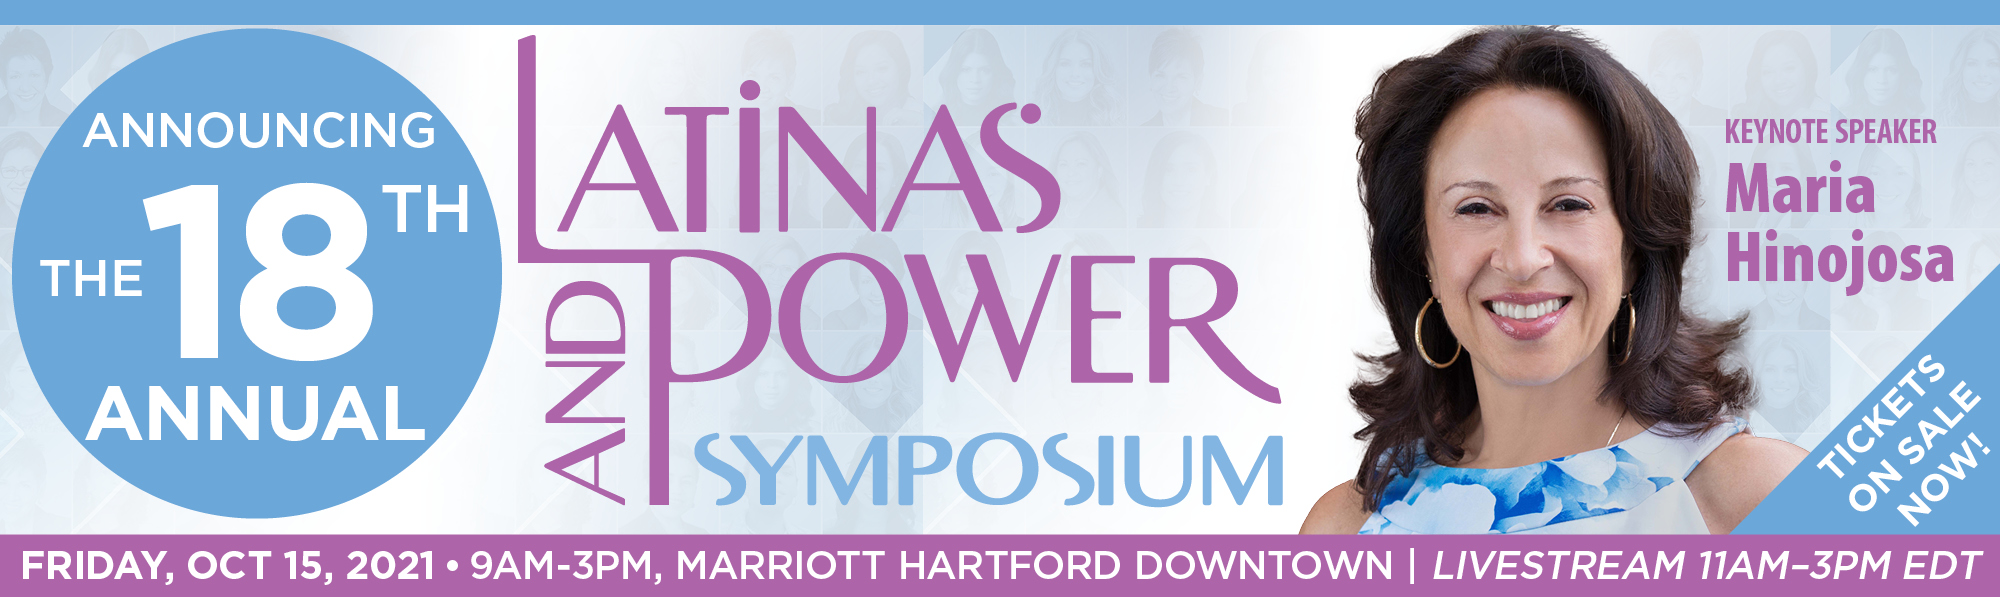 19th Annual Latinas & Power Symposium featuring keynote speakers Nely Gálan and Bertha Coombs